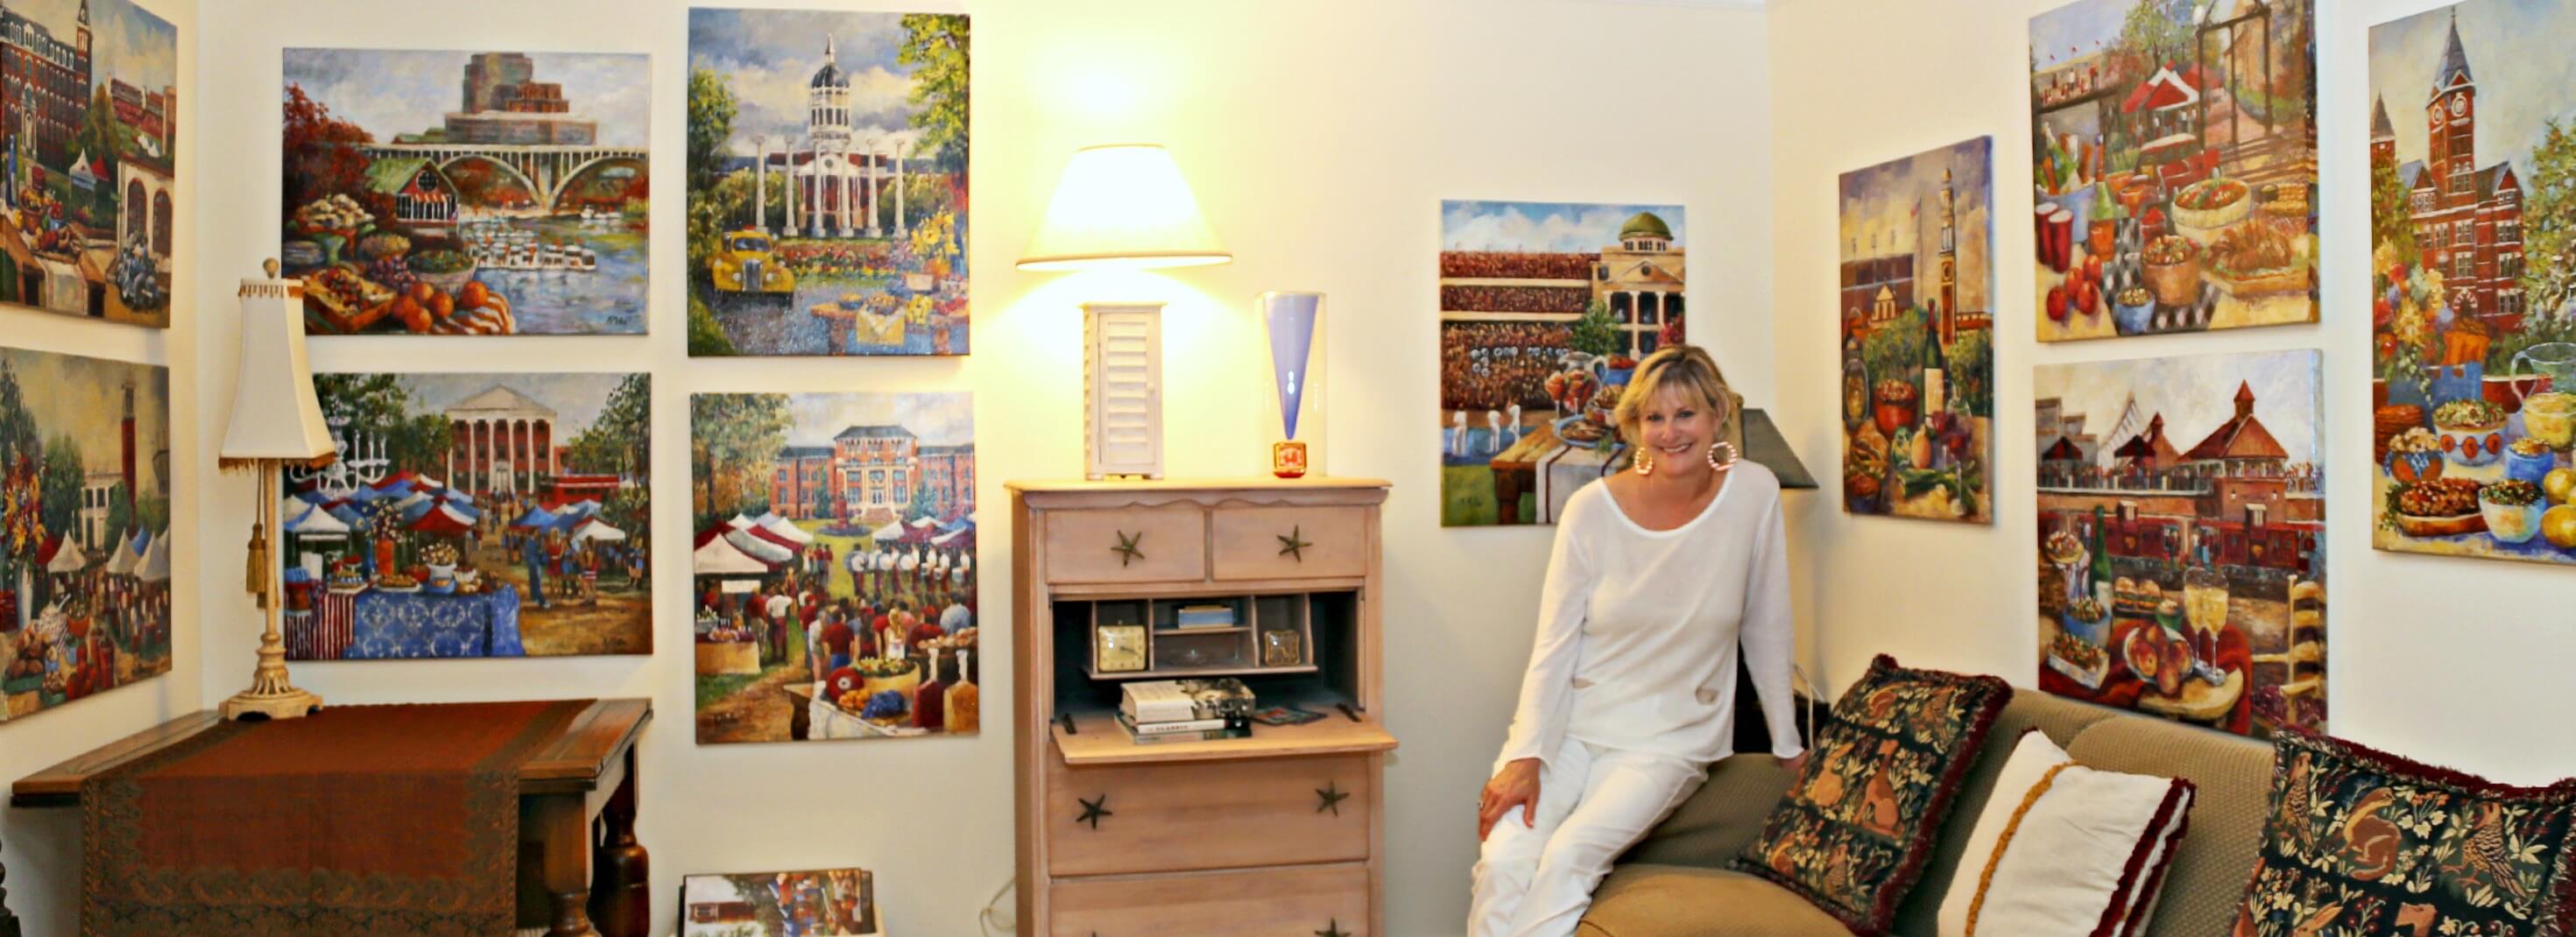 Kathy & Her 14 Original Tailgating Paintings photo by Susan Scarborough